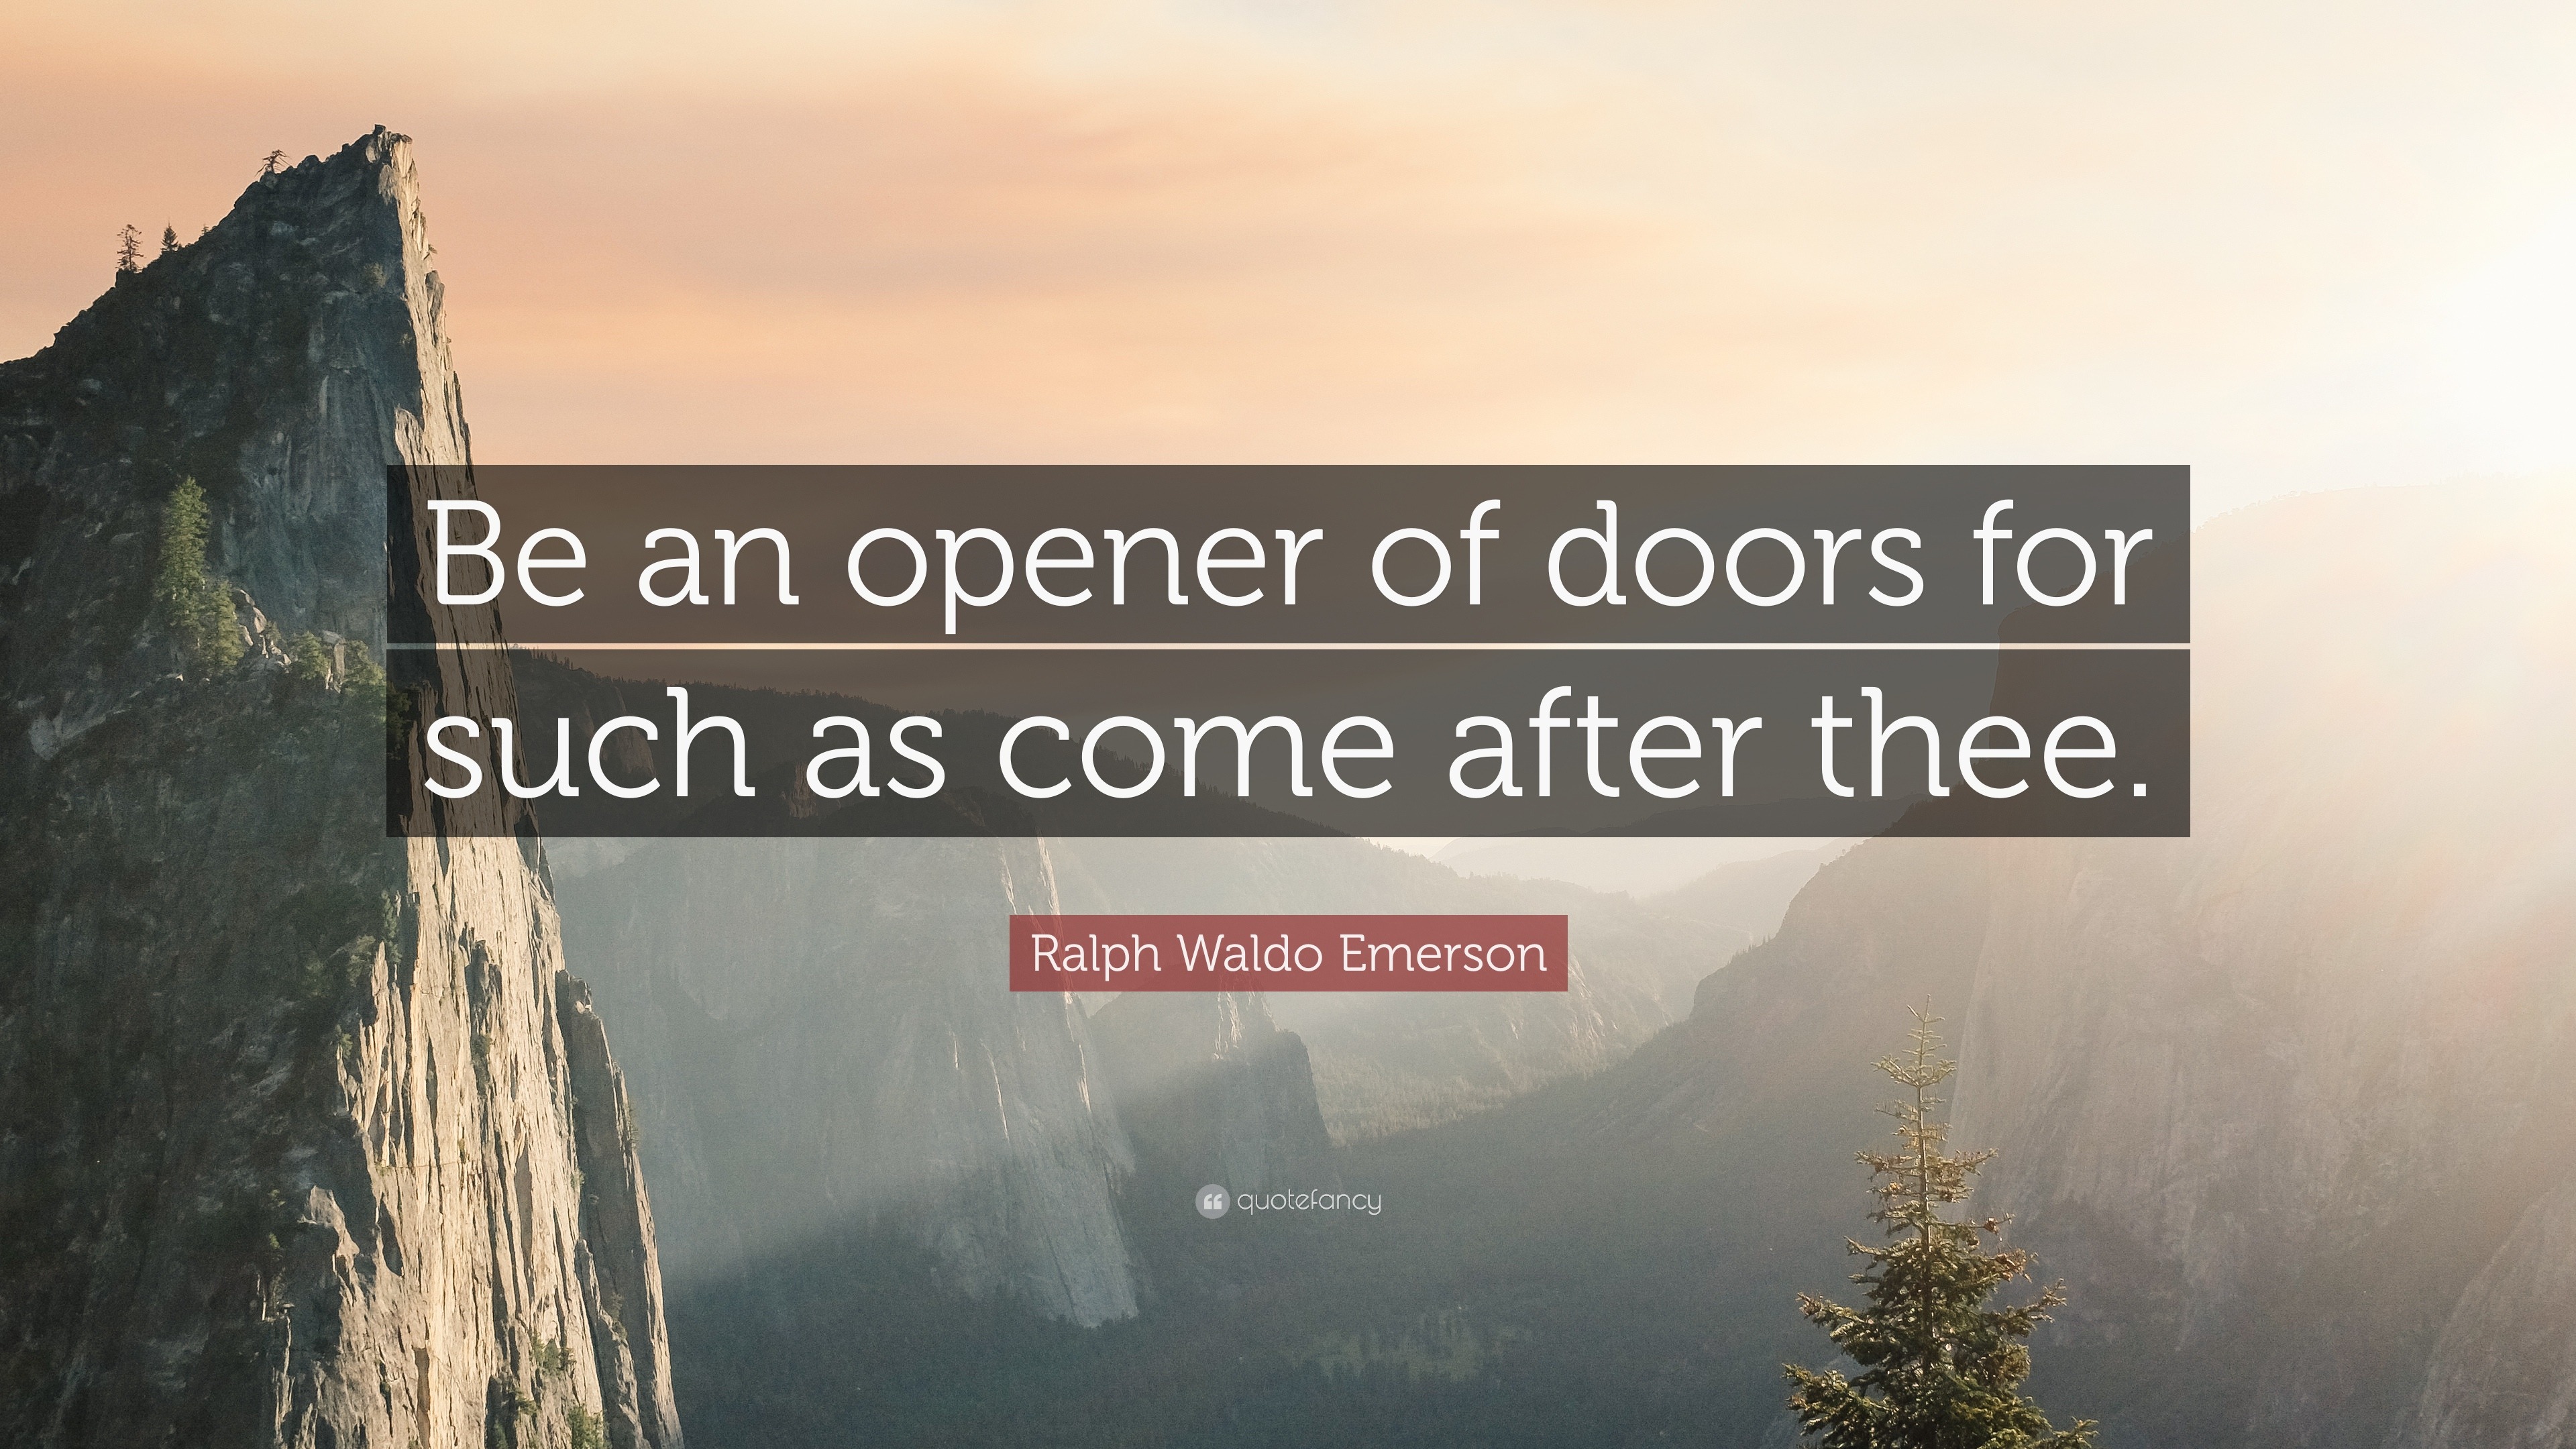 https://quotefancy.com/media/wallpaper/3840x2160/485183-Ralph-Waldo-Emerson-Quote-Be-an-opener-of-doors-for-such-as-come.jpg